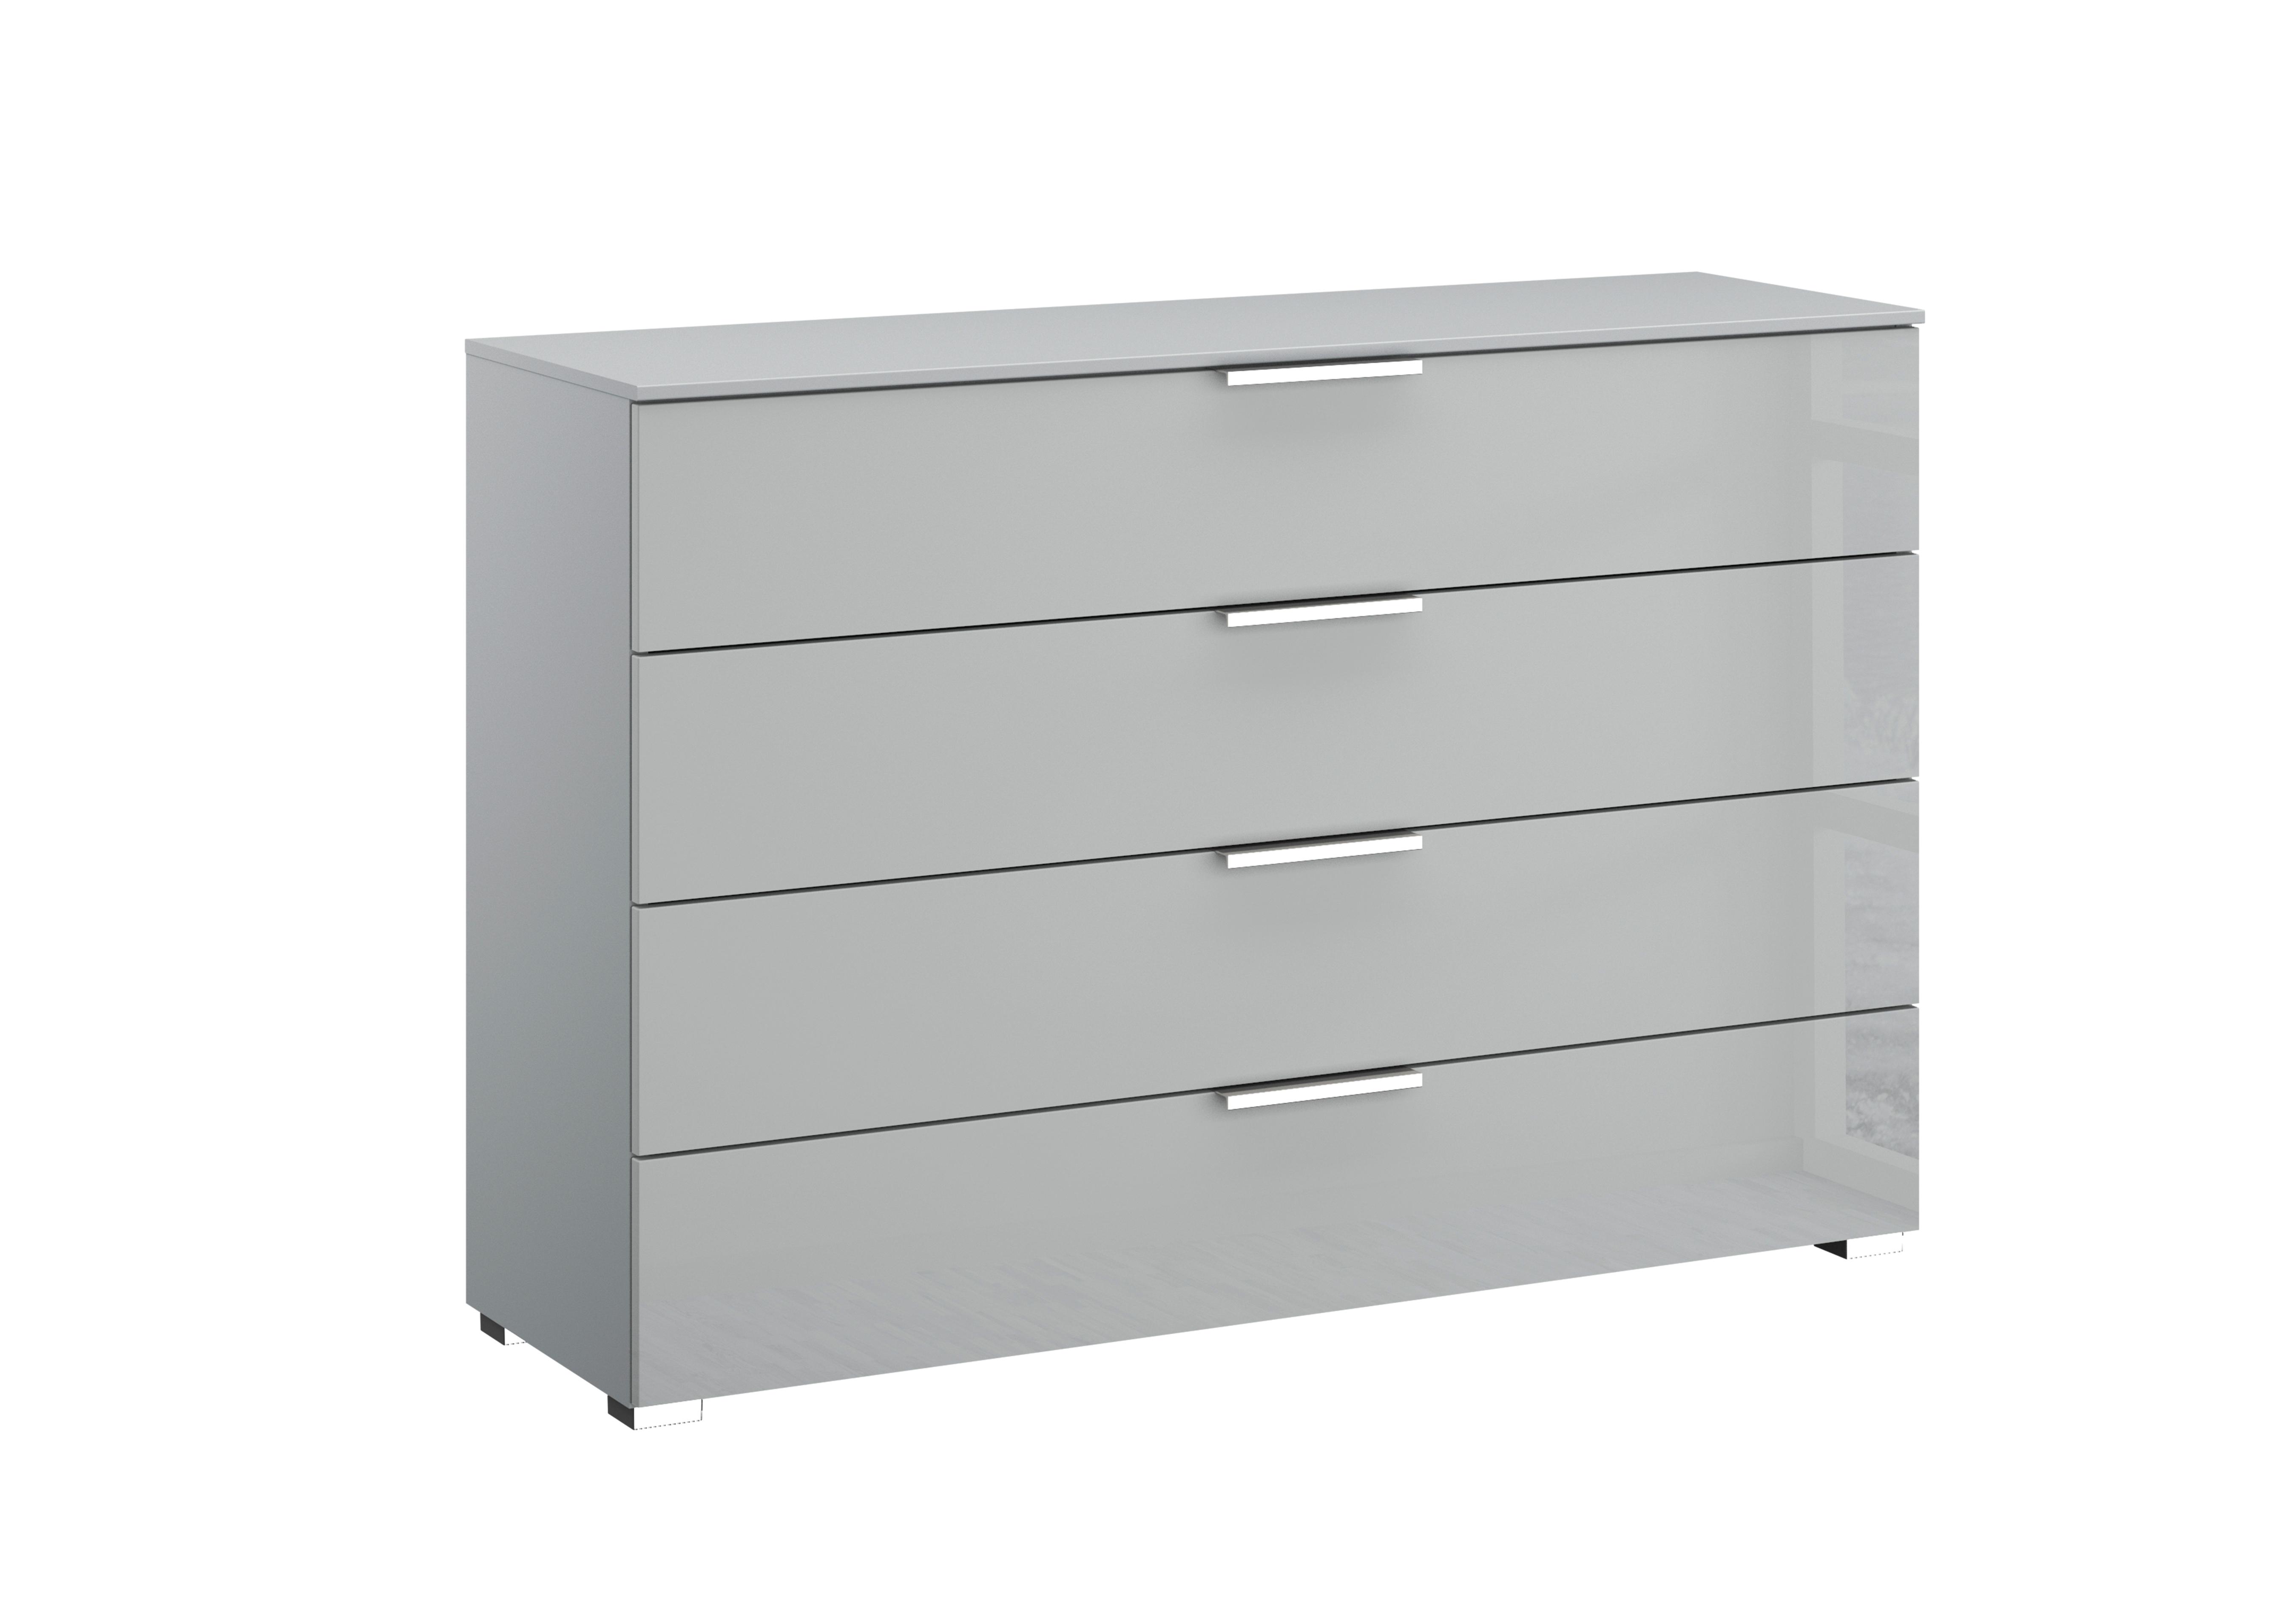 Perth 4 Drawer Wide Chest in Z2603 Silk Grey Carc And Glass on Furniture Village